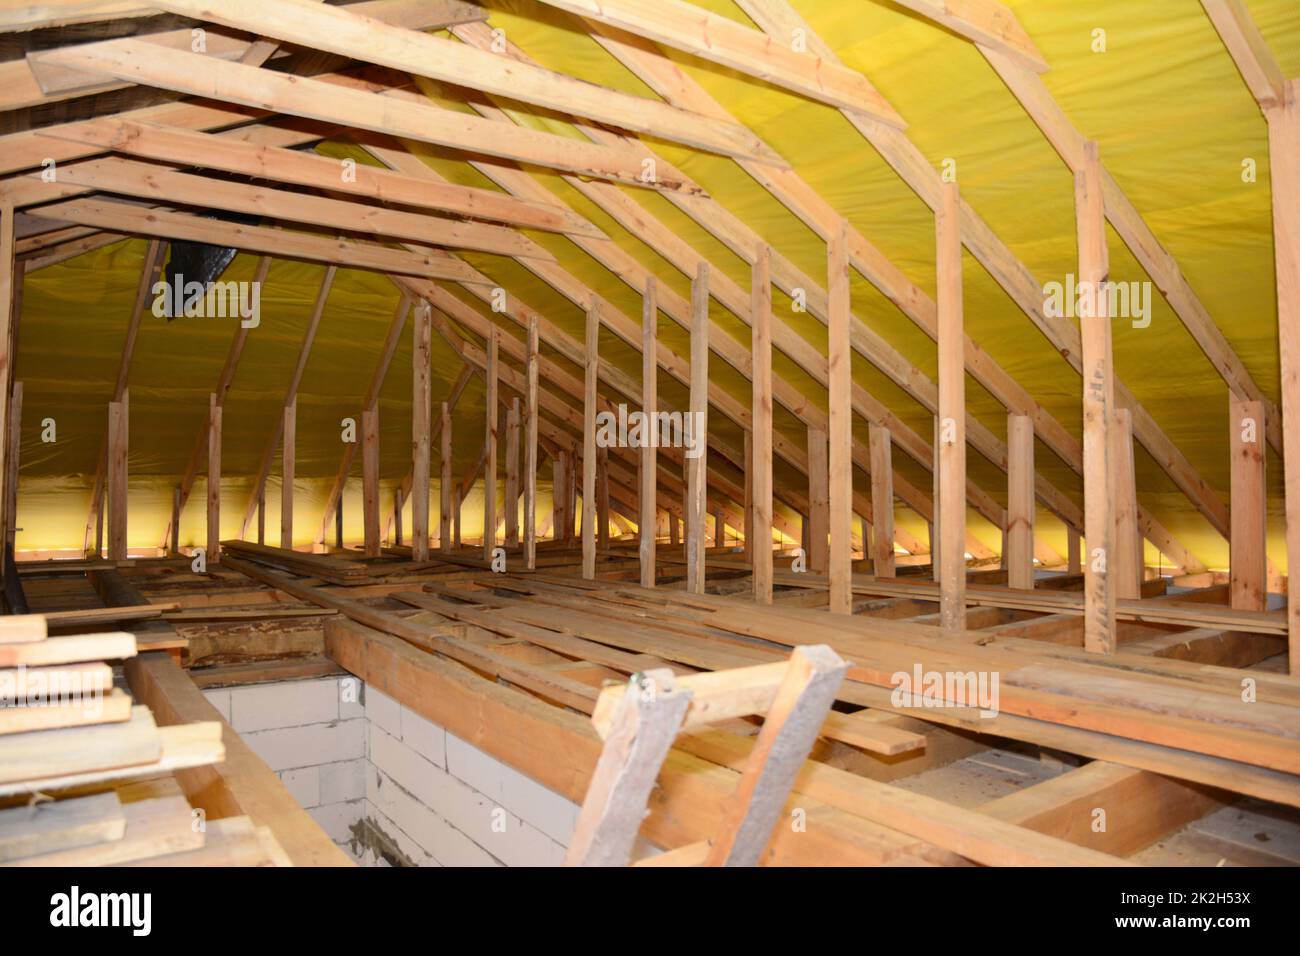 Roofing Construction Interior. Wooden Roof Beams, Wooden Frame, Rafters, Trusses,  House Attic Construction. Stock Photo